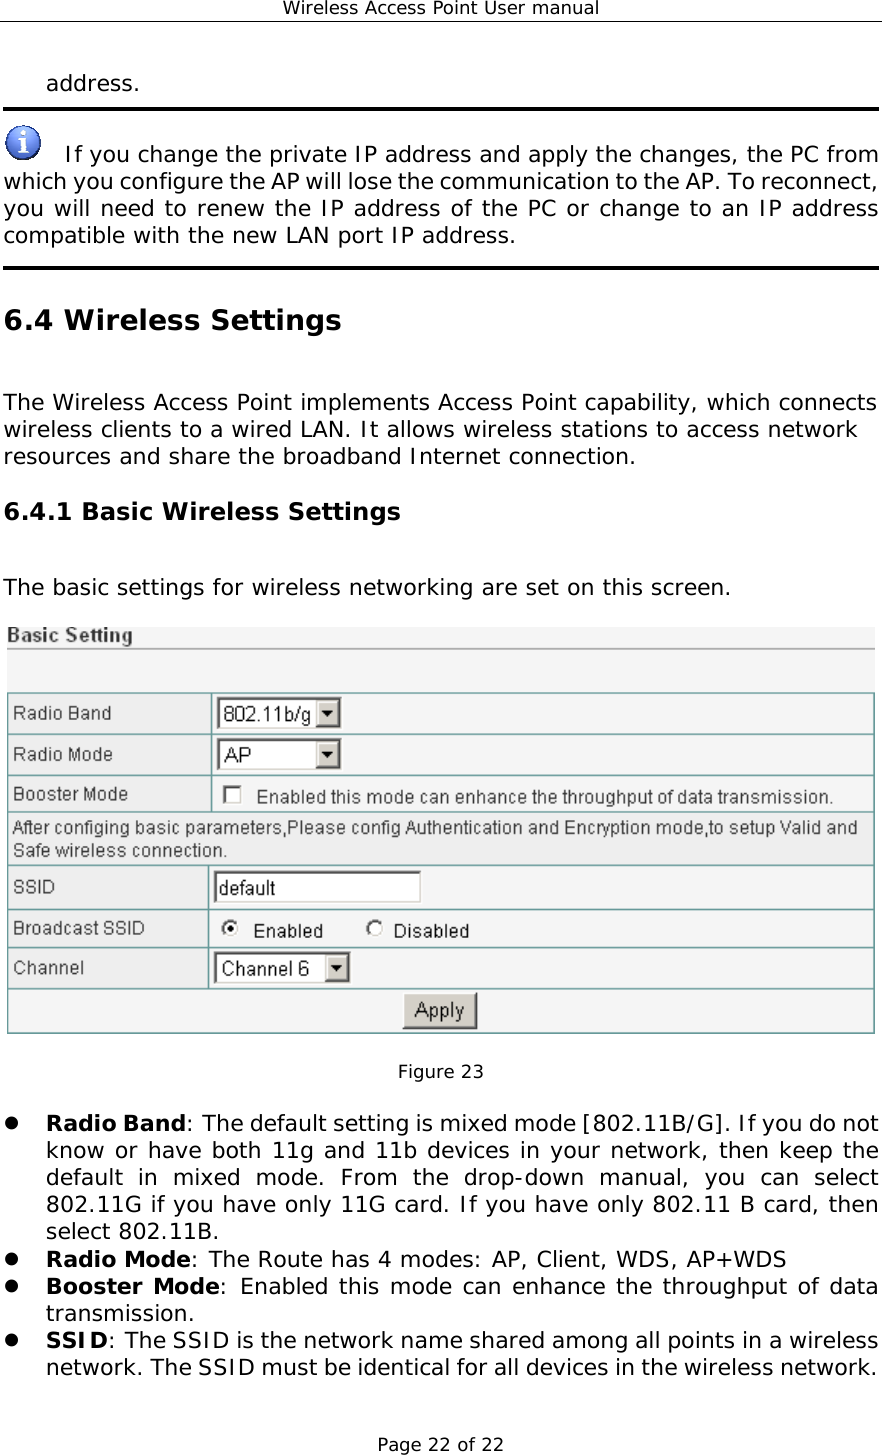 Wireless Access Point User manual Page 22 of 22 address.    If you change the private IP address and apply the changes, the PC from which you configure the AP will lose the communication to the AP. To reconnect, you will need to renew the IP address of the PC or change to an IP address compatible with the new LAN port IP address.  6.4 Wireless Settings The Wireless Access Point implements Access Point capability, which connects wireless clients to a wired LAN. It allows wireless stations to access network resources and share the broadband Internet connection. 6.4.1 Basic Wireless Settings The basic settings for wireless networking are set on this screen.    Figure 23    Radio Band: The default setting is mixed mode [802.11B/G]. If you do not know or have both 11g and 11b devices in your network, then keep the default in mixed mode. From the drop-down manual, you can select 802.11G if you have only 11G card. If you have only 802.11 B card, then select 802.11B.   Radio Mode: The Route has 4 modes: AP, Client, WDS, AP+WDS   Booster Mode: Enabled this mode can enhance the throughput of data transmission.   SSID: The SSID is the network name shared among all points in a wireless network. The SSID must be identical for all devices in the wireless network. 